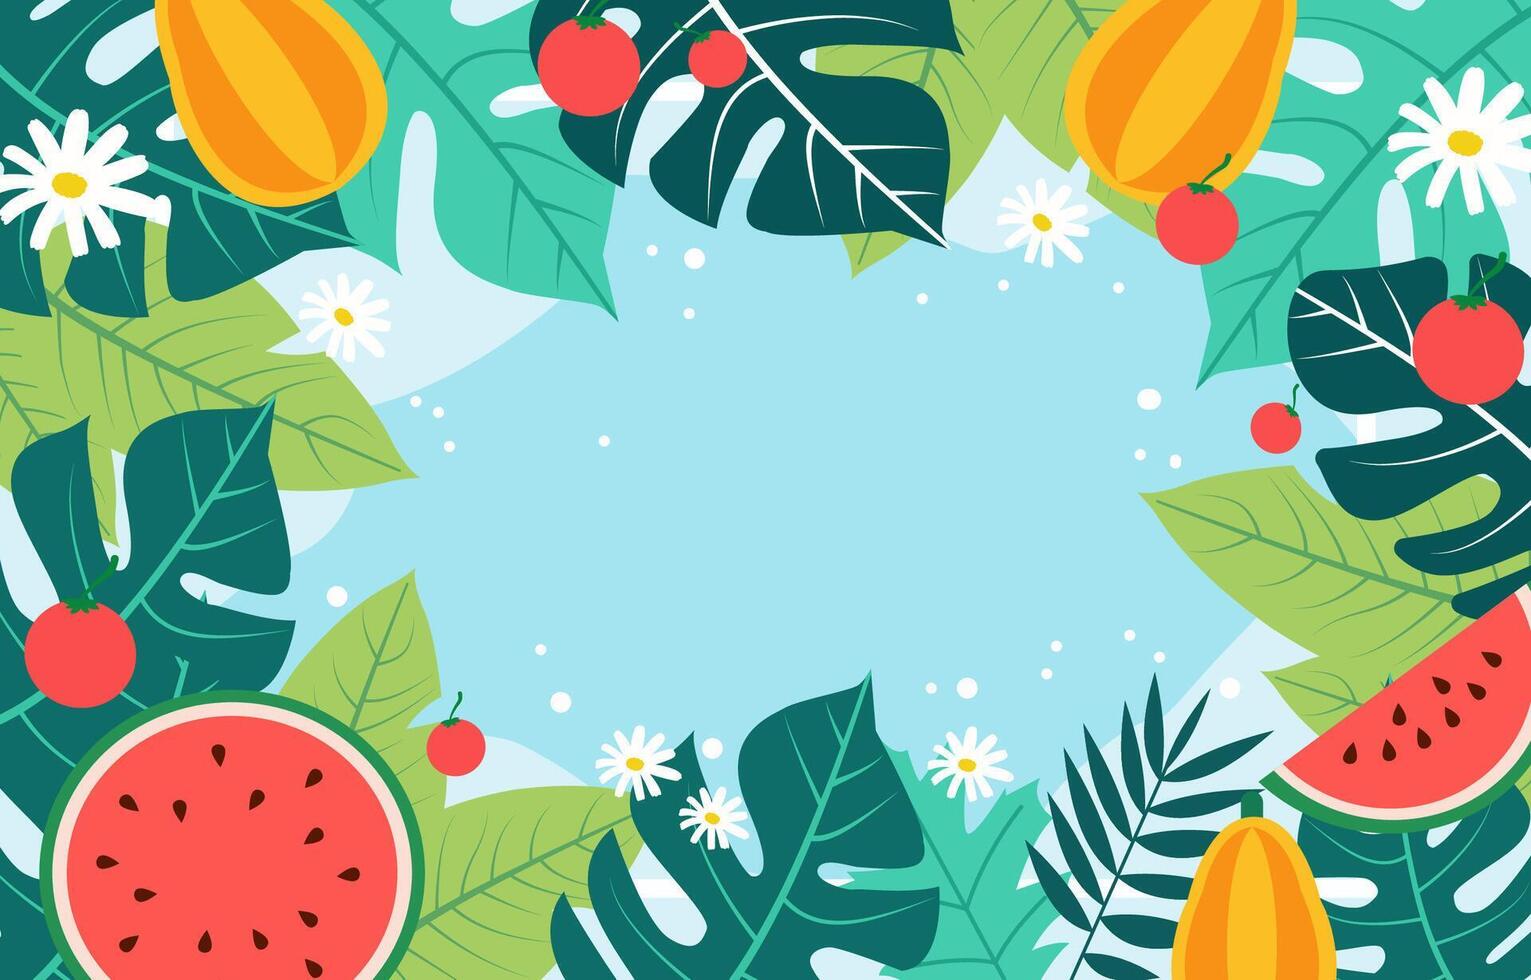 Empty Greeting Card of Summer Watermelon Leaf Frame Background vector